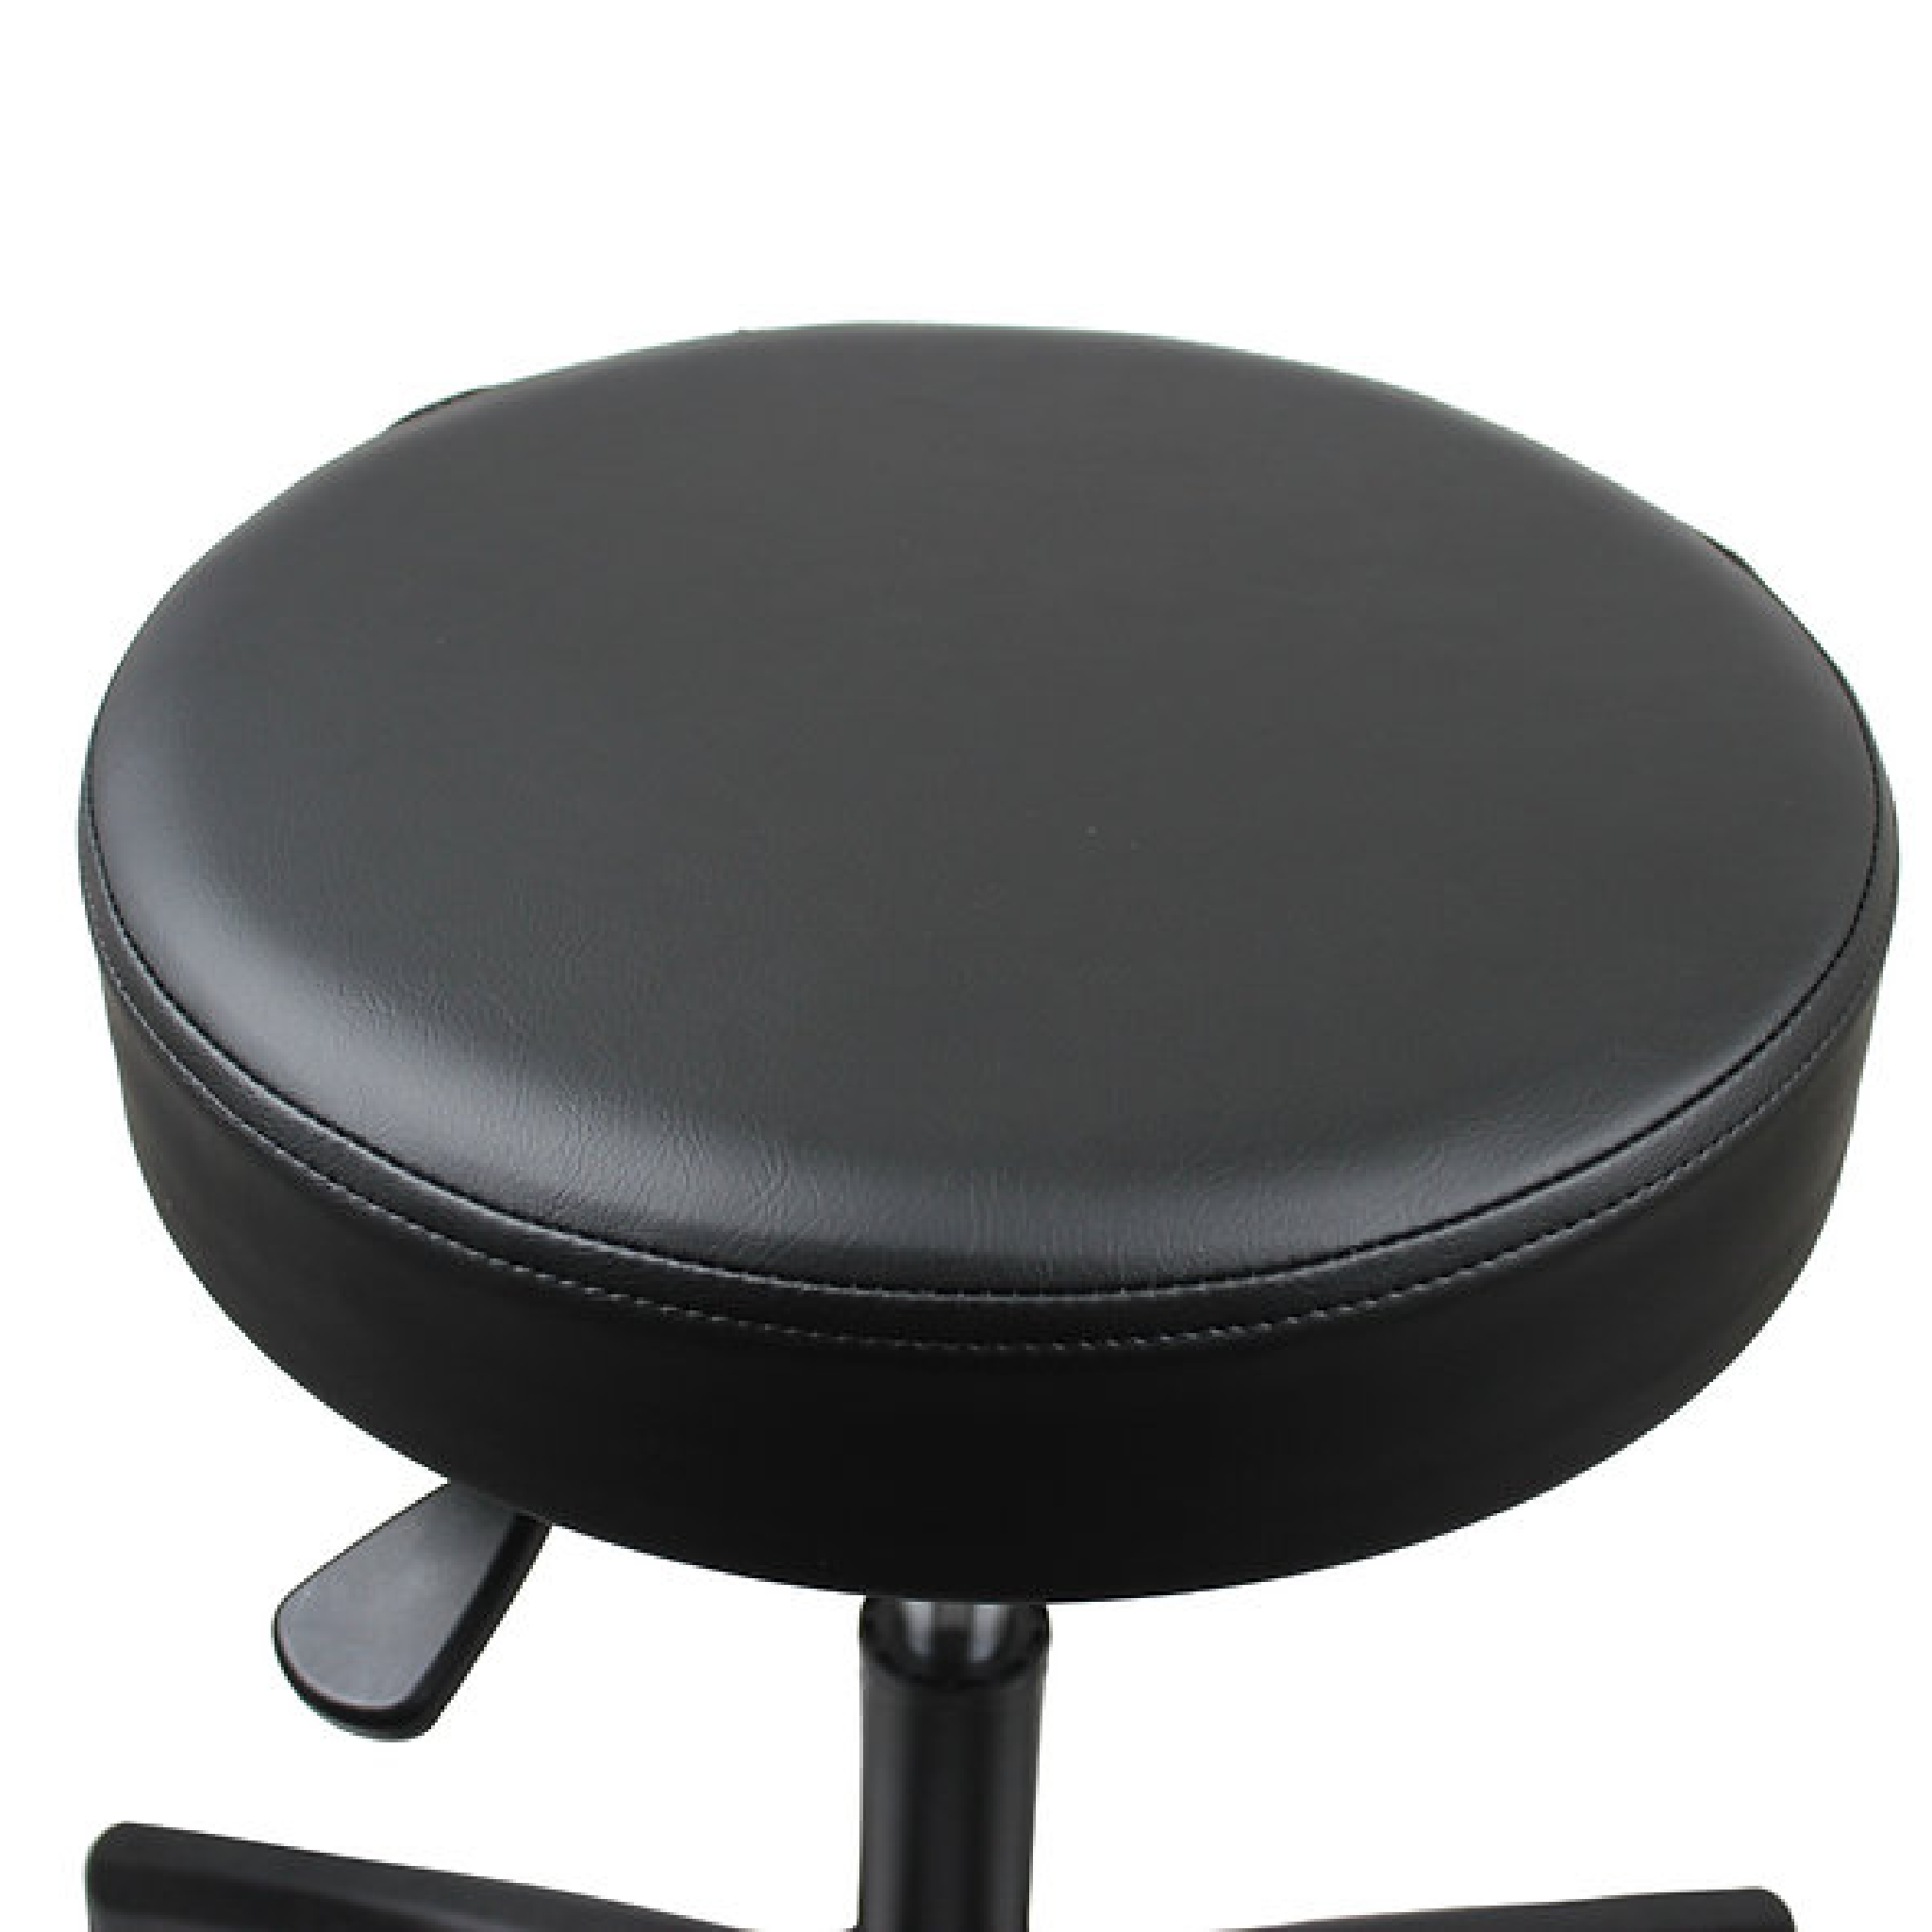 Durable Seat Cover for 14-15 inch Round Stools